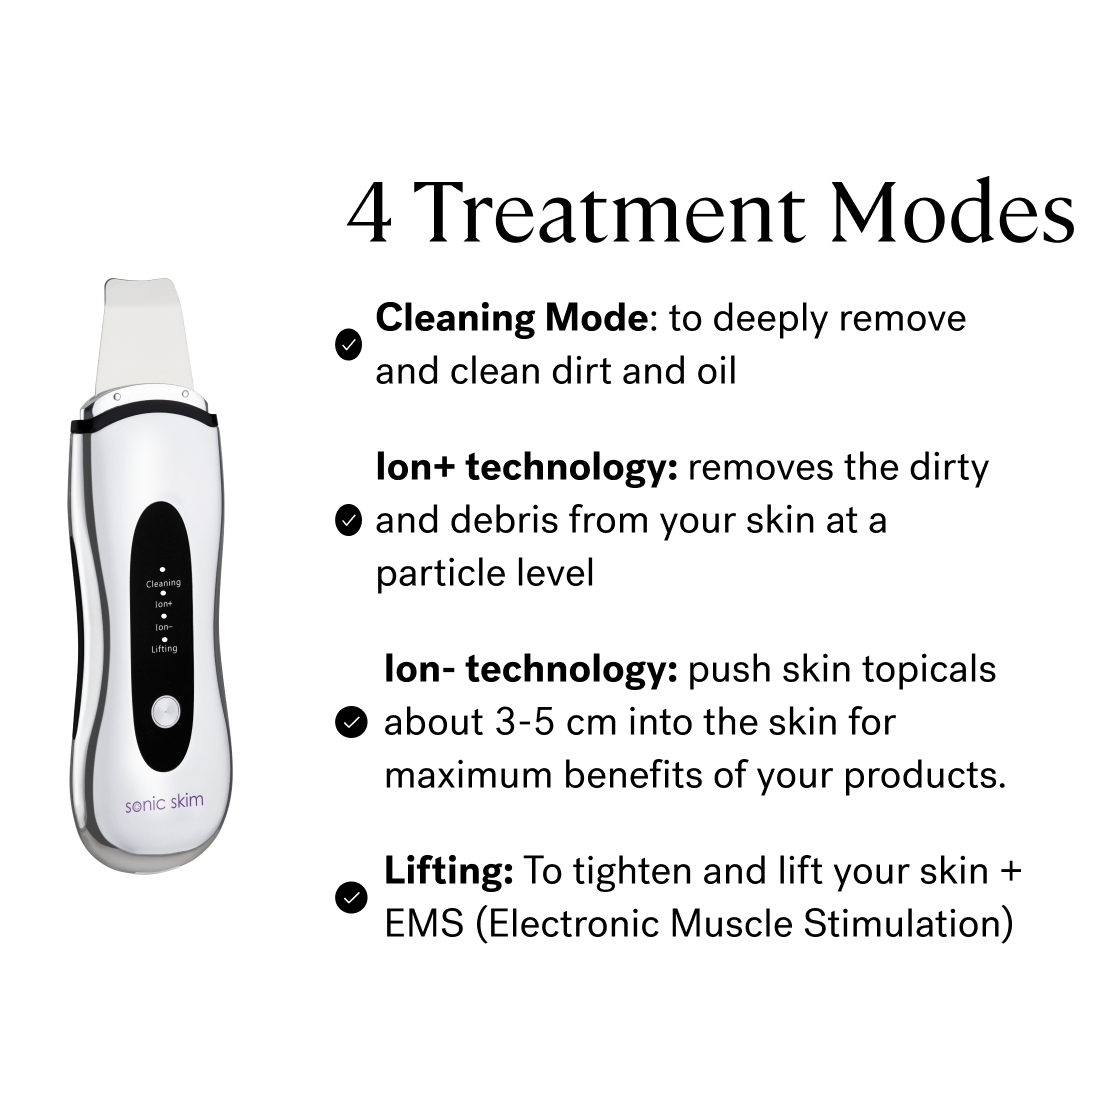 The Glow All Day by Michael Todd Beauty offers 4 treatment modes including a cleaning mode.